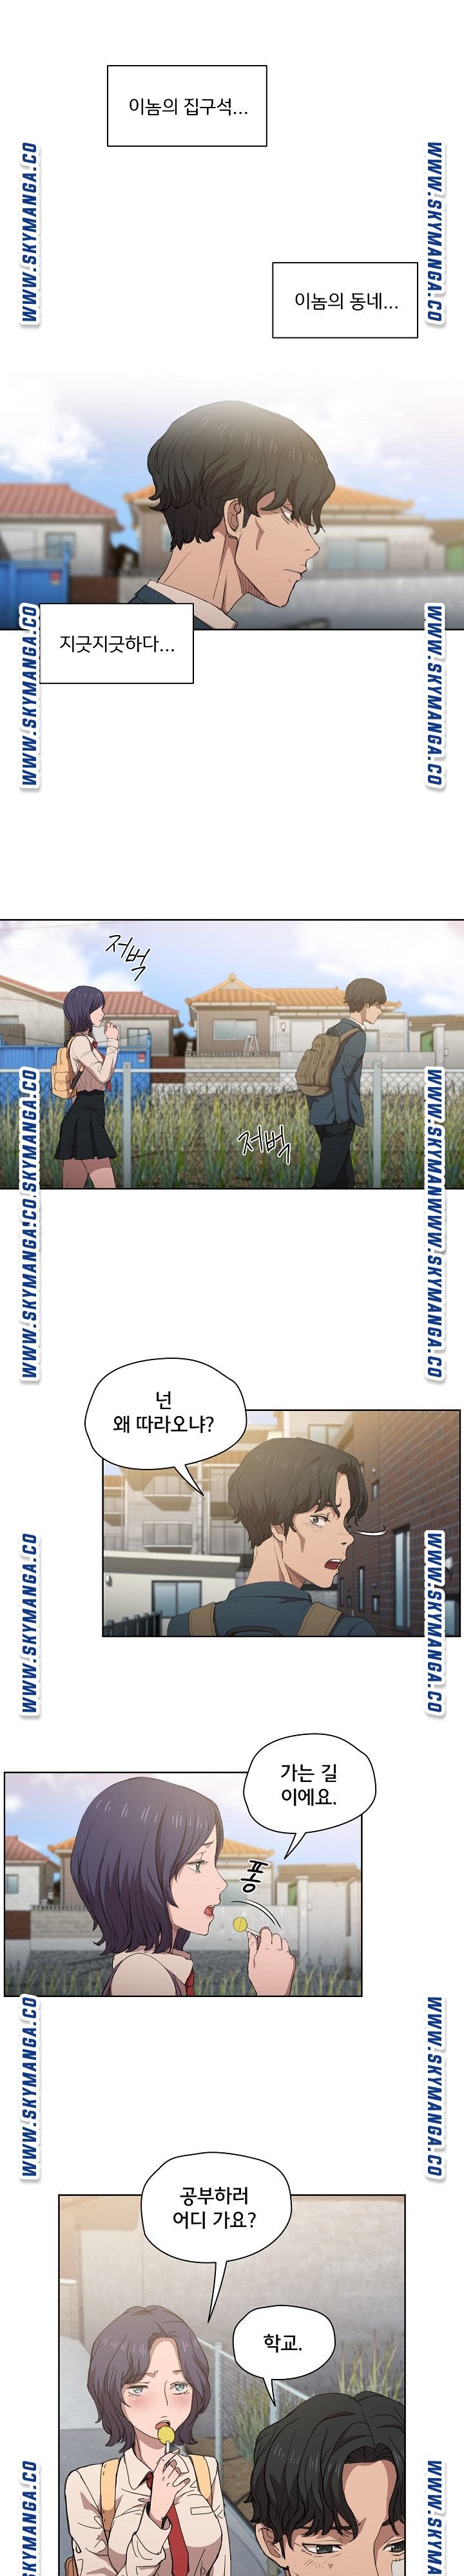 how-about-getting-lost-raw-chap-3-10